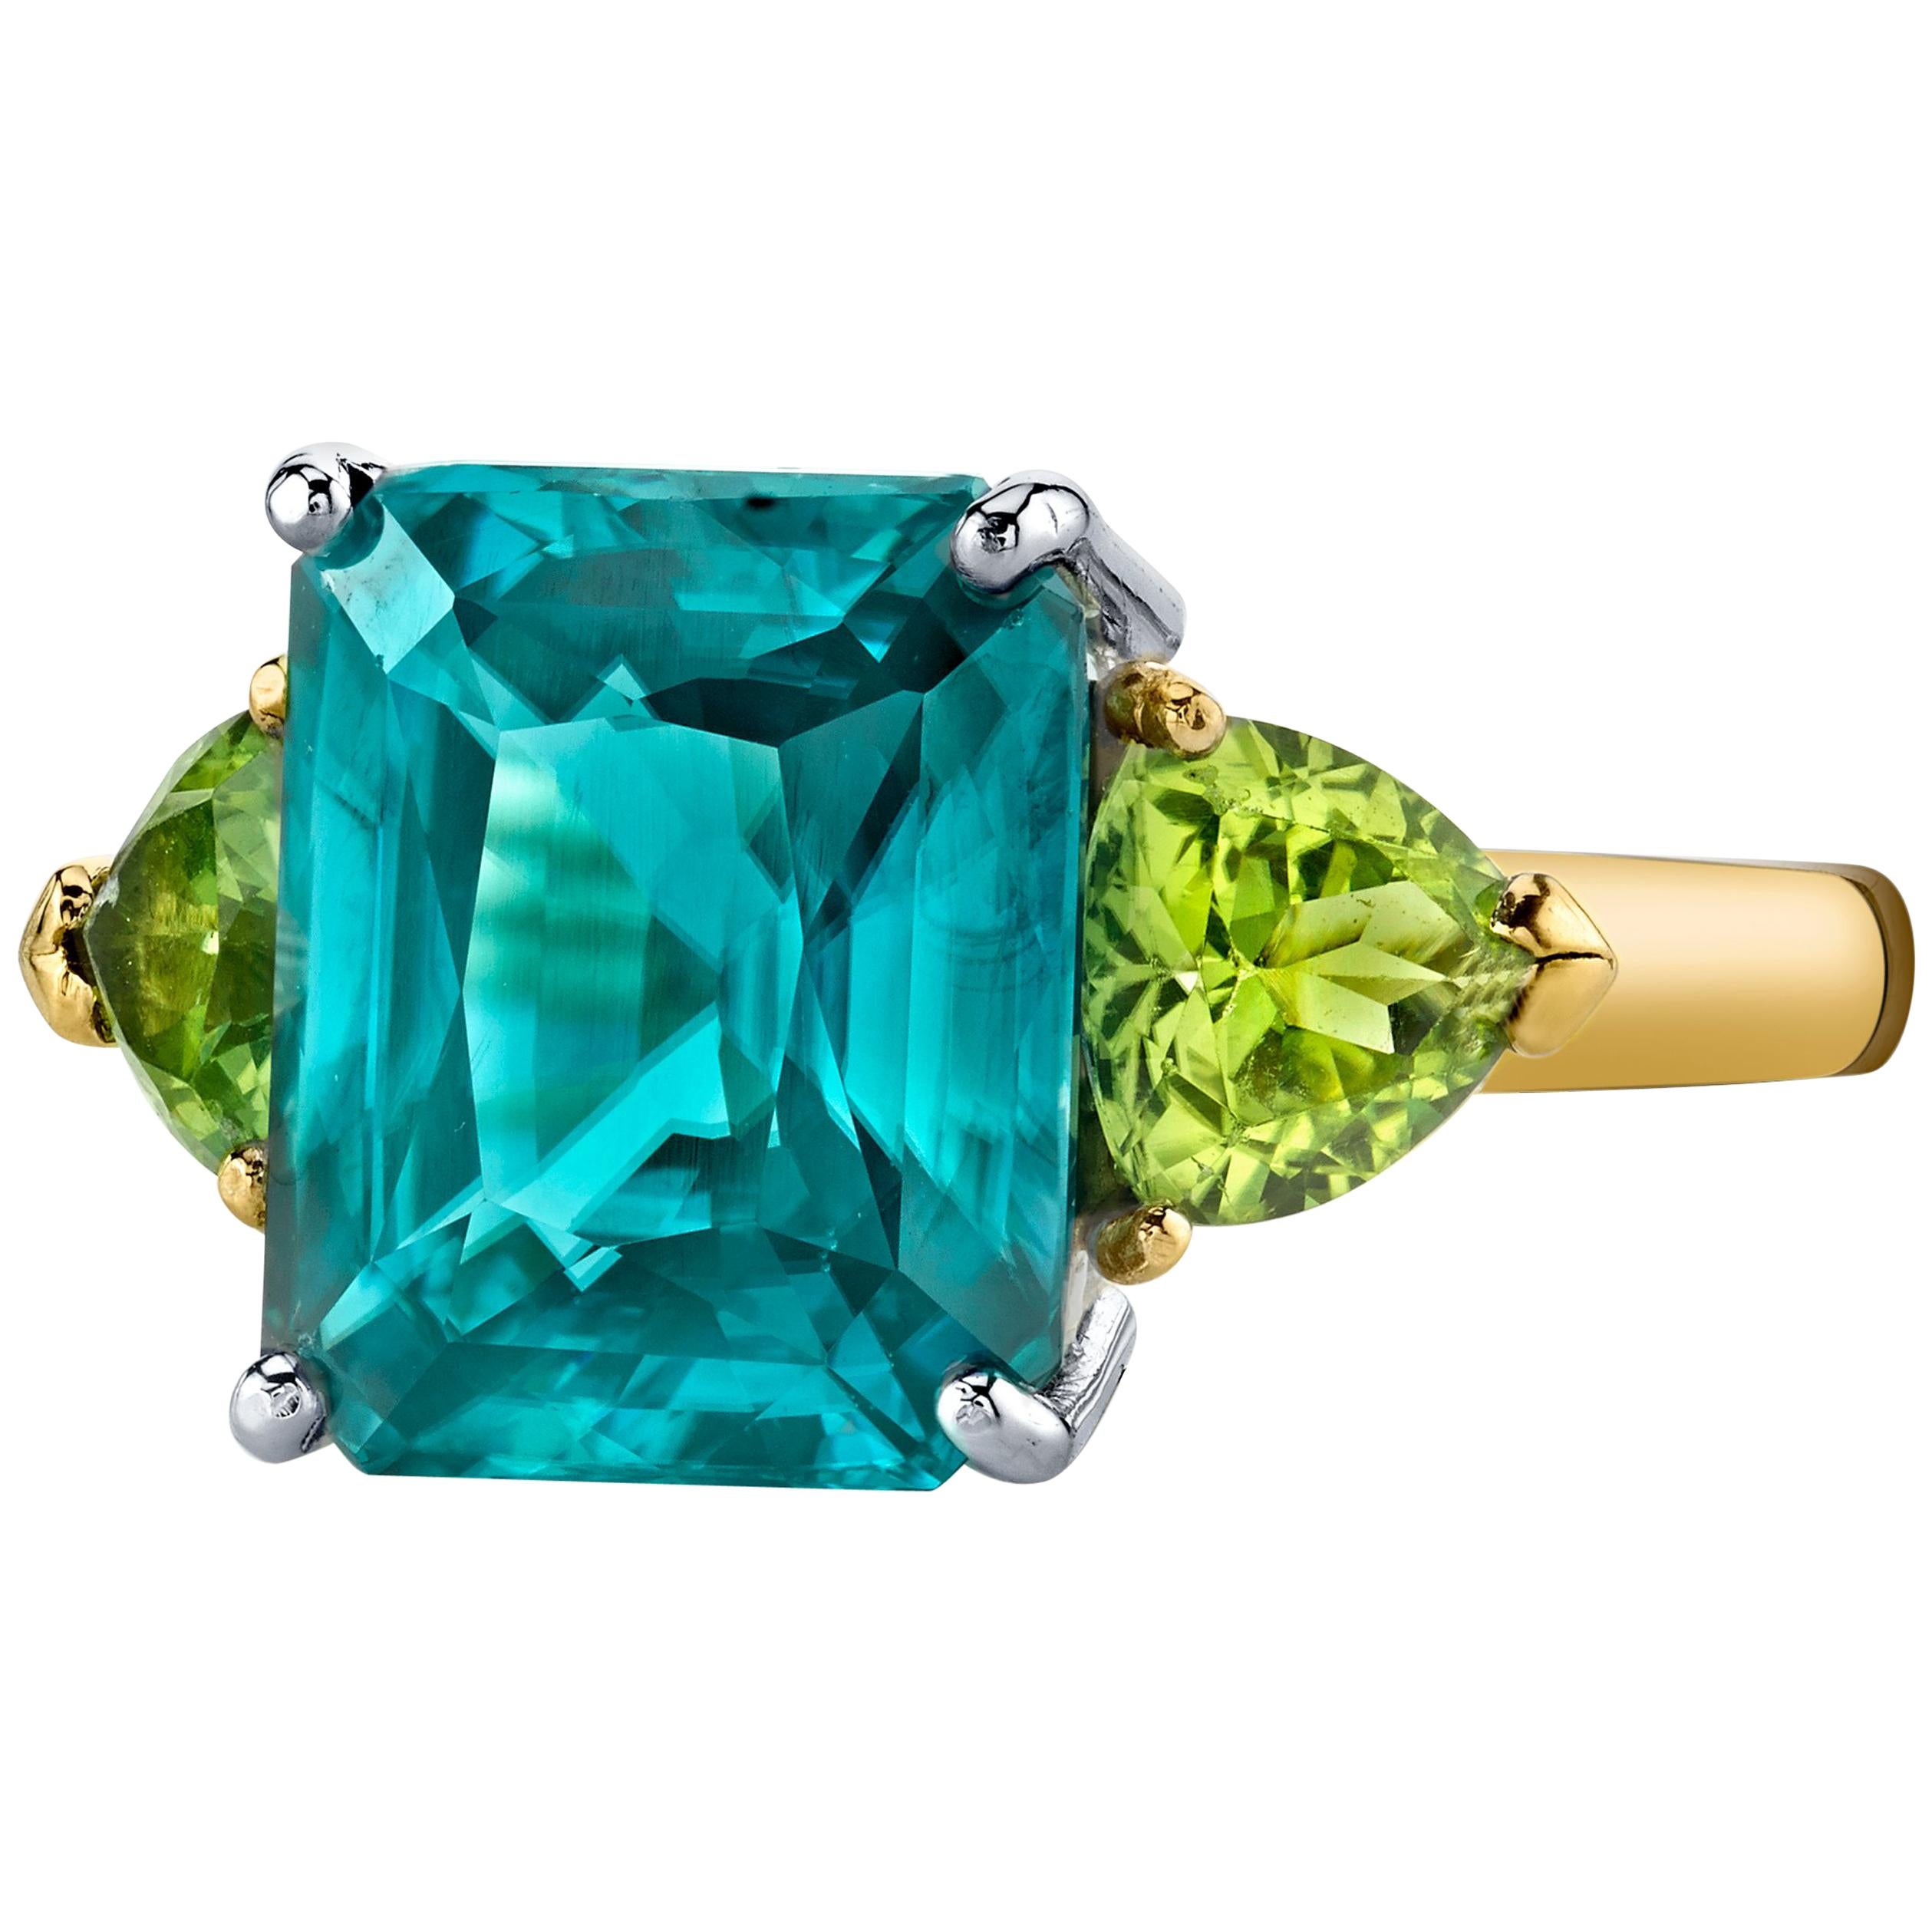 9.74 ct. Blue Zircon and Peridot 18k Yellow and White Gold 3-Stone Cocktail Ring